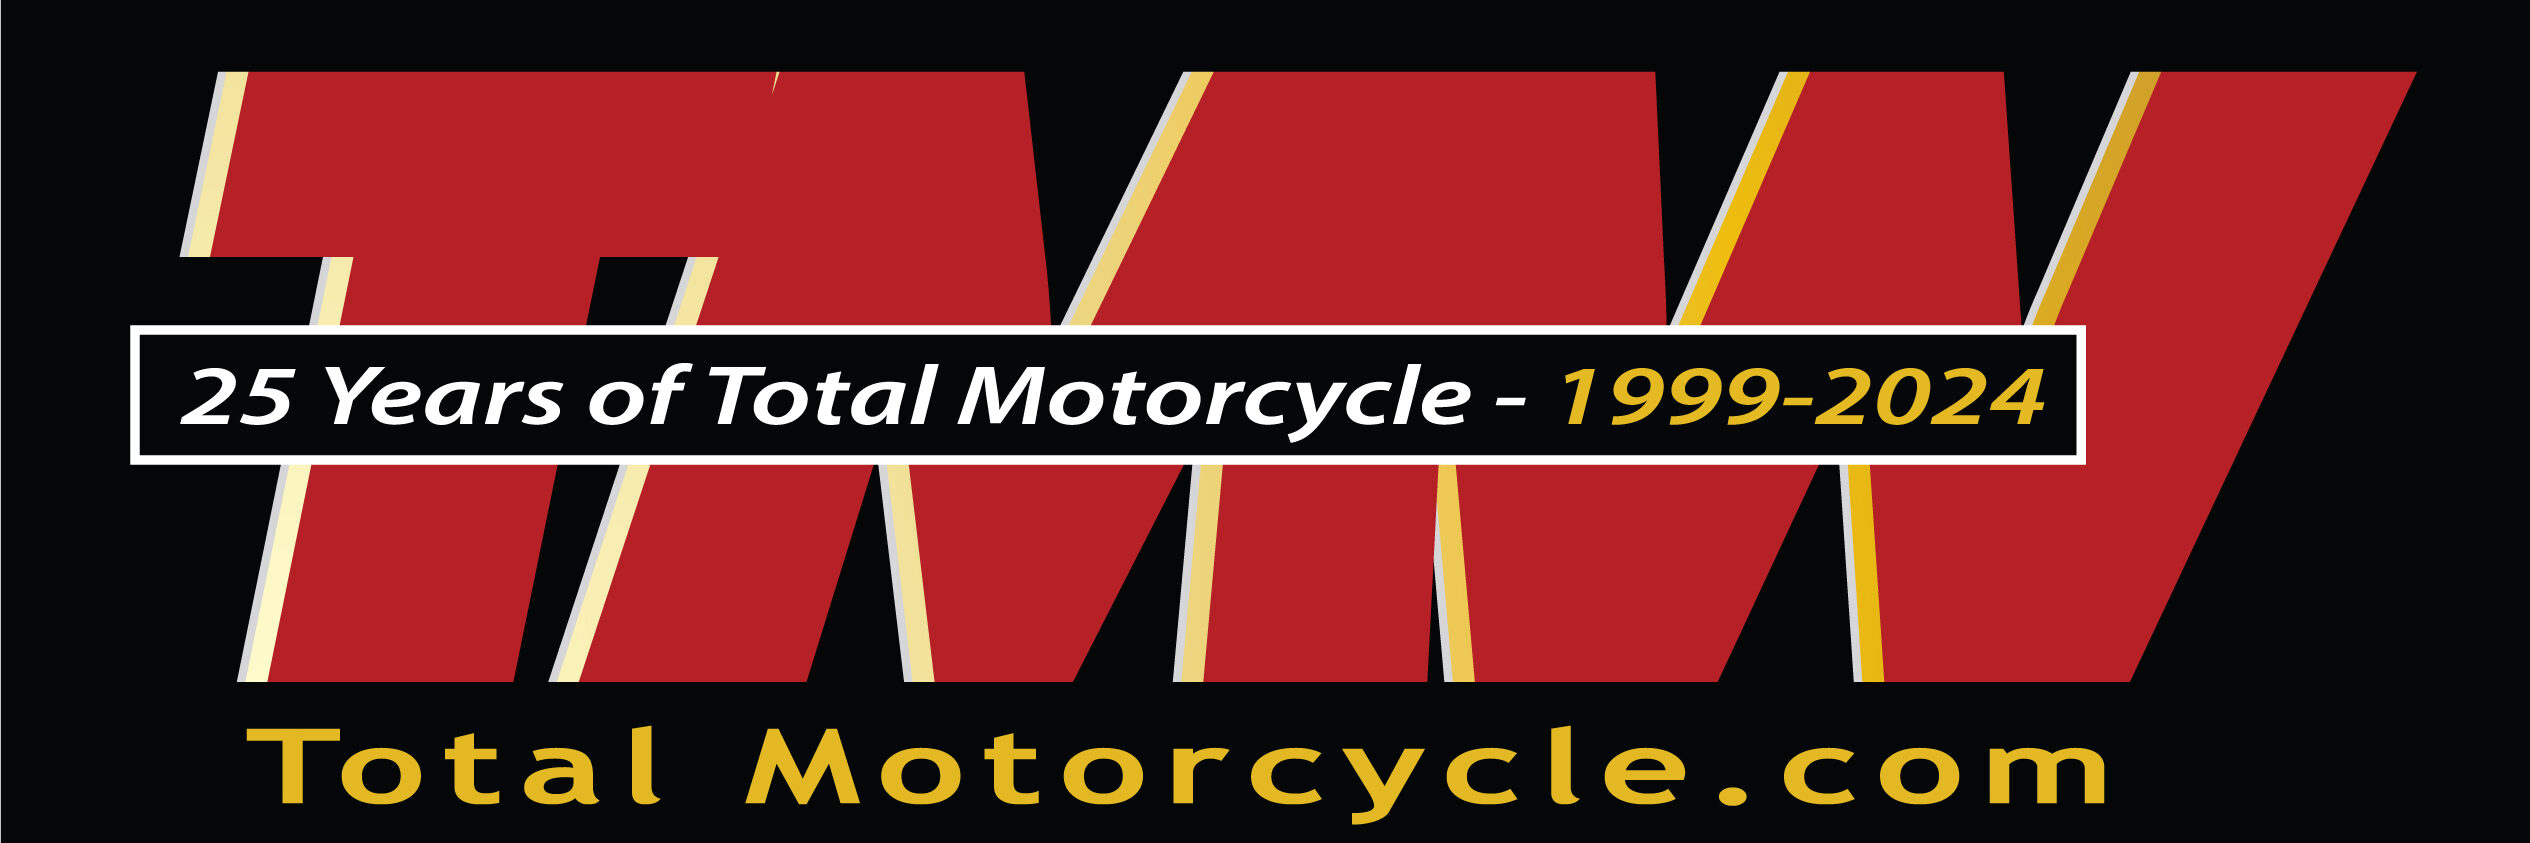 25 Years of Total Motorcycle.com 1999-2024